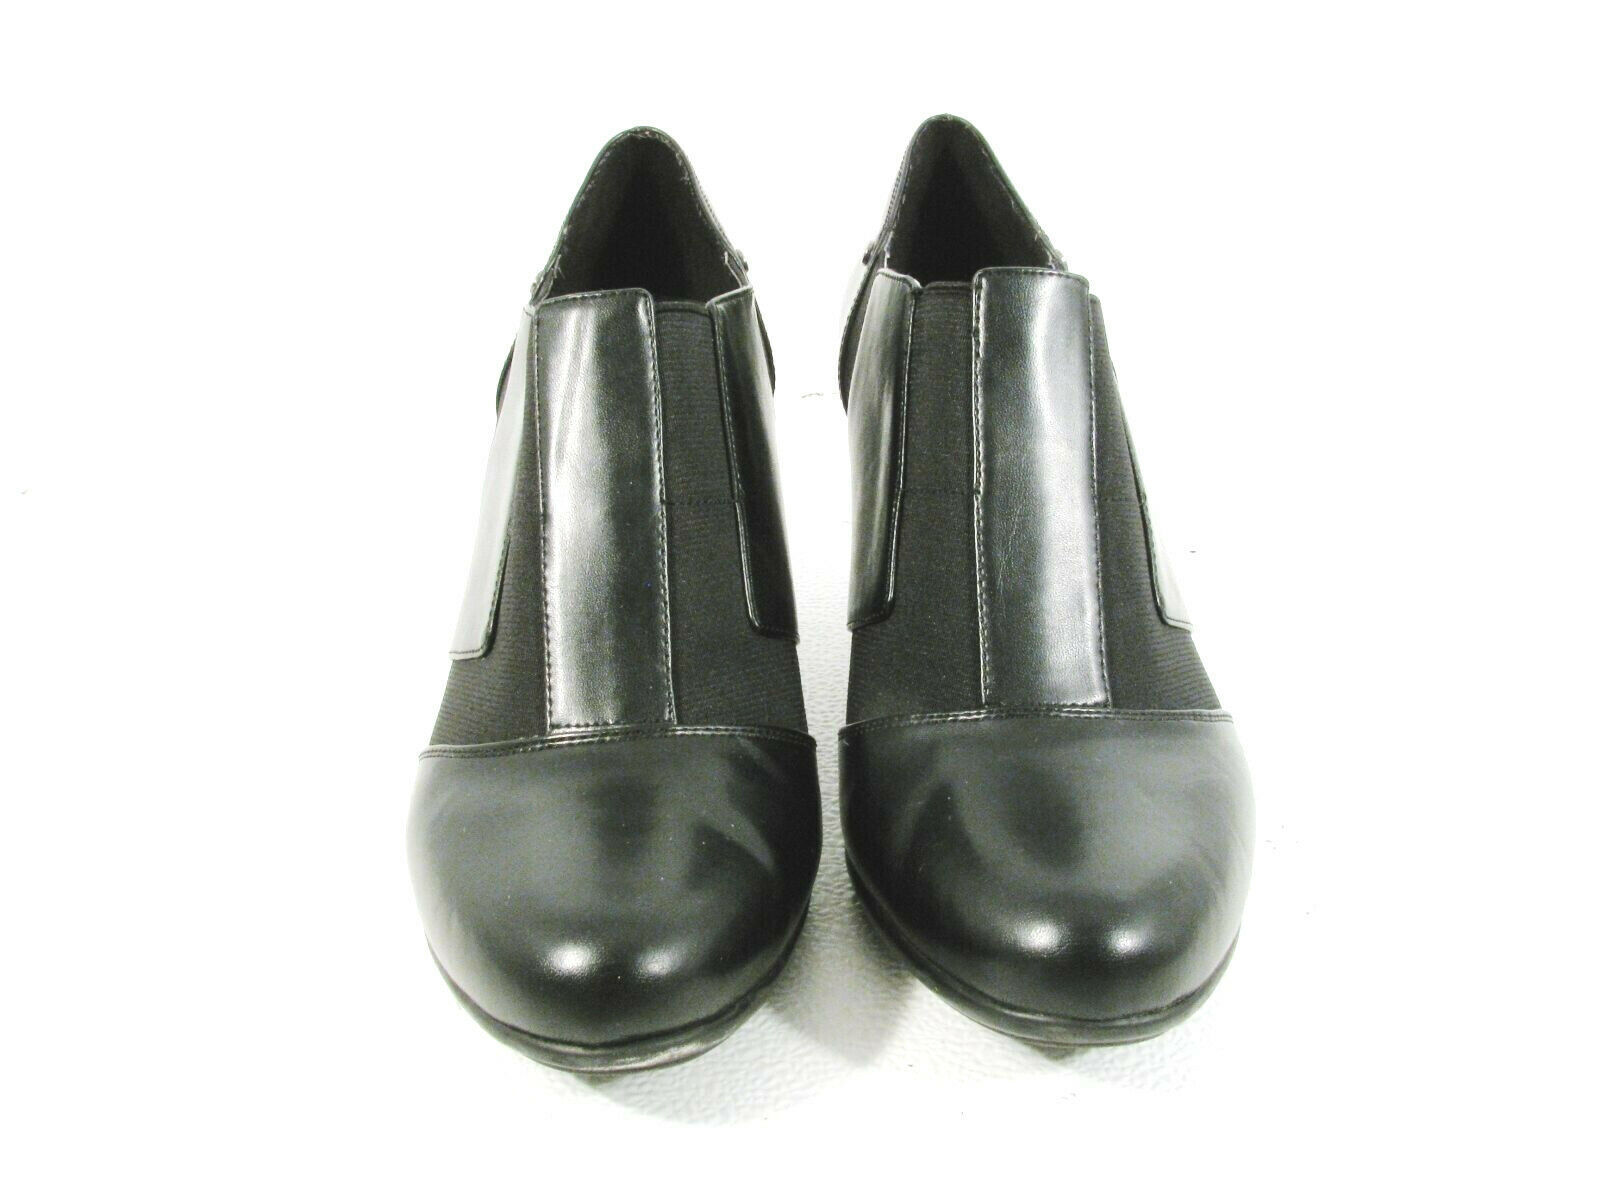 Eurostep Charlaine Women's Ankle Booties Shoes Black Slip On Heels Size ...